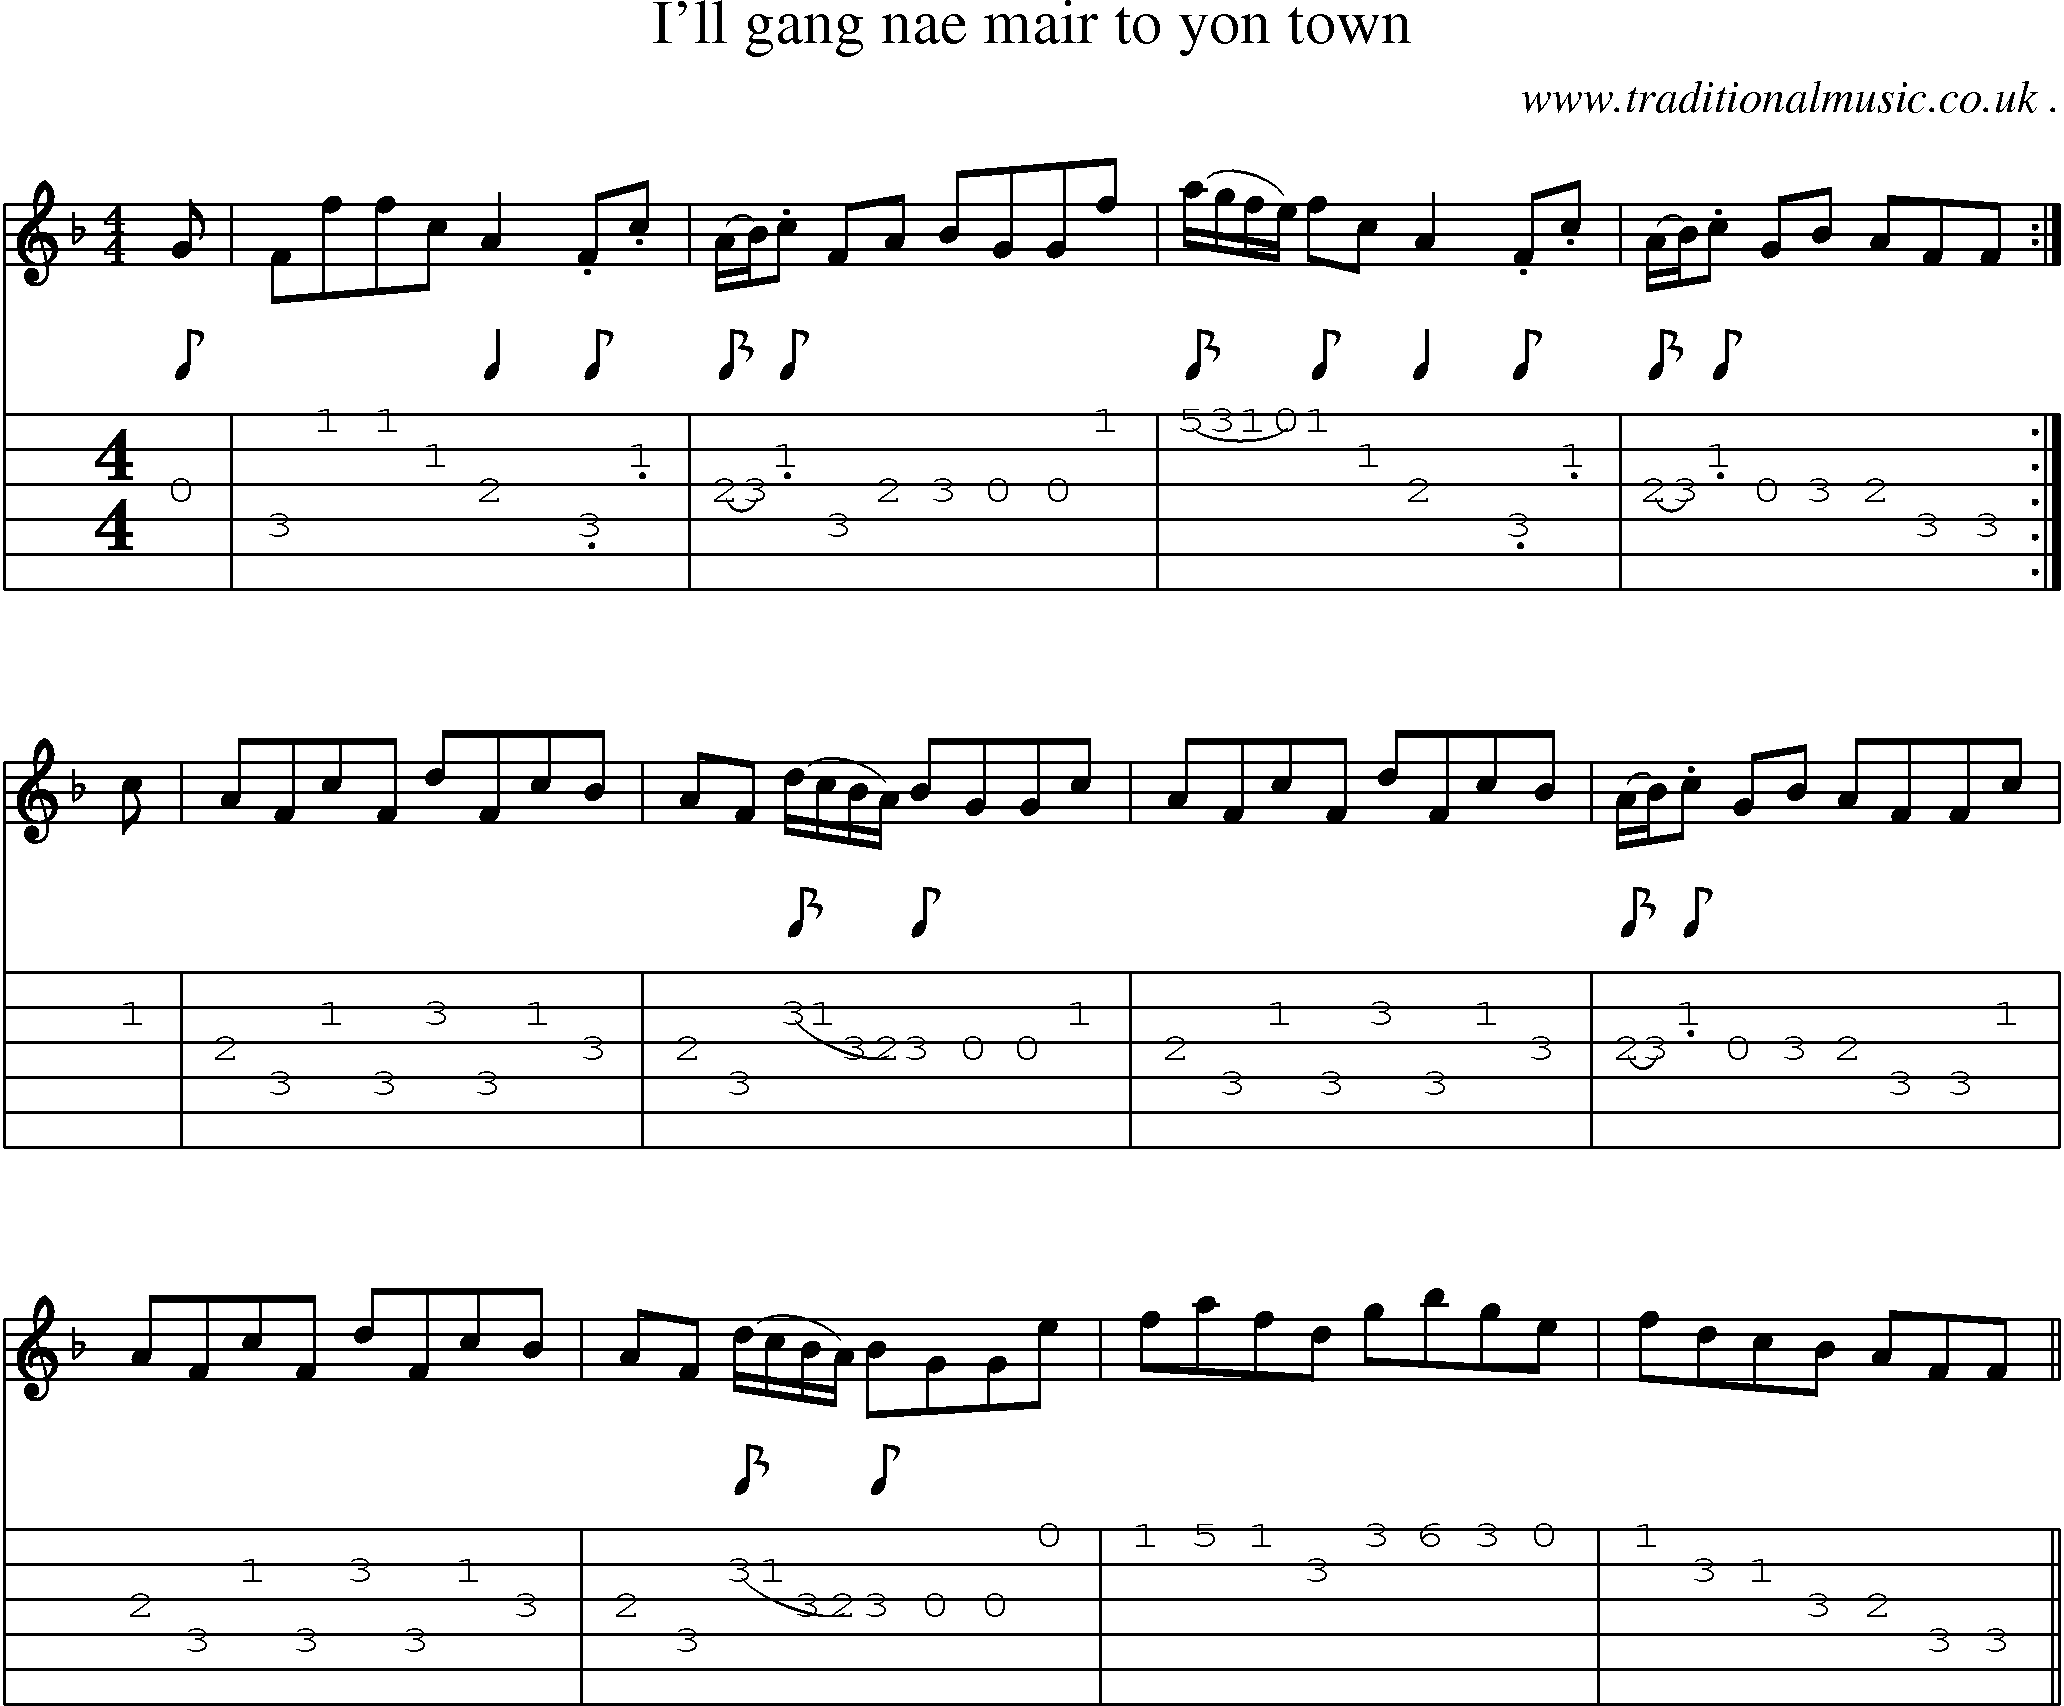 Sheet-Music and Guitar Tabs for Ill Gang Nae Mair To Yon Town